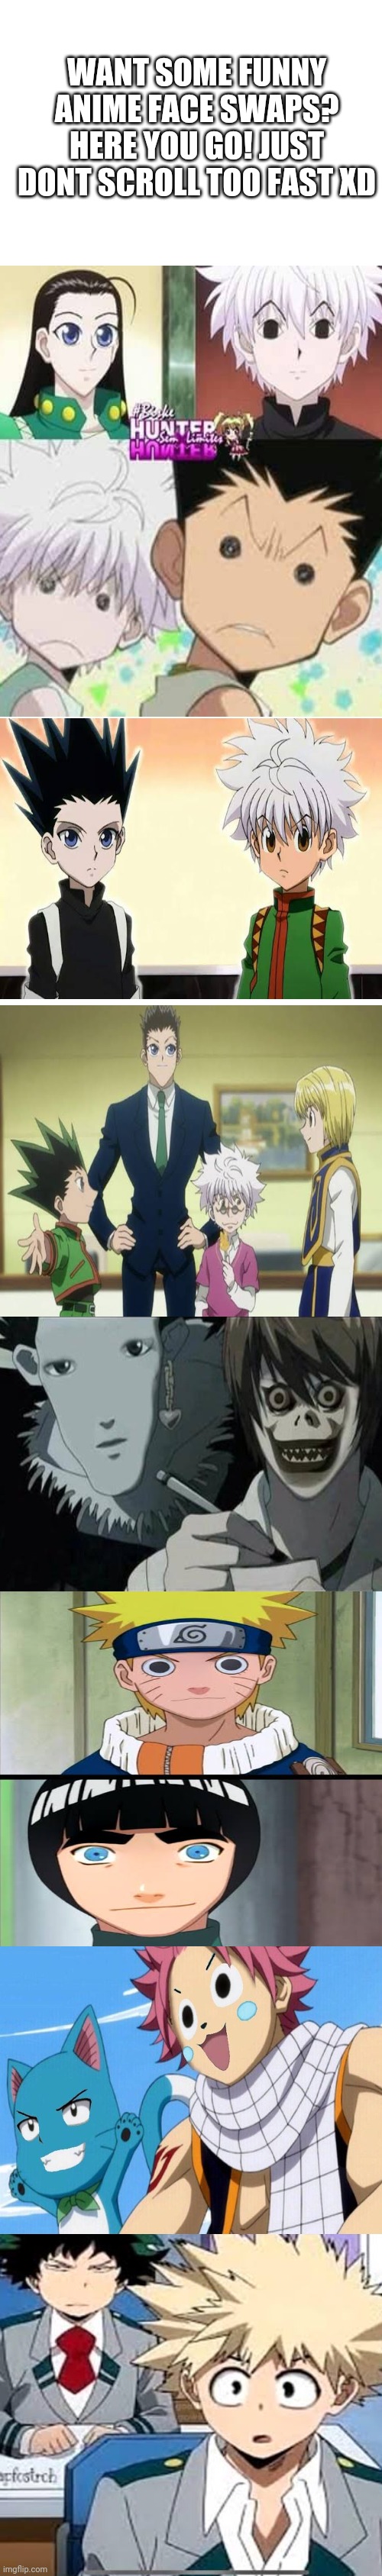 A flood of anime face swaps. | WANT SOME FUNNY ANIME FACE SWAPS? HERE YOU GO! JUST DONT SCROLL TOO FAST XD | image tagged in anime,face swaps,funny | made w/ Imgflip meme maker